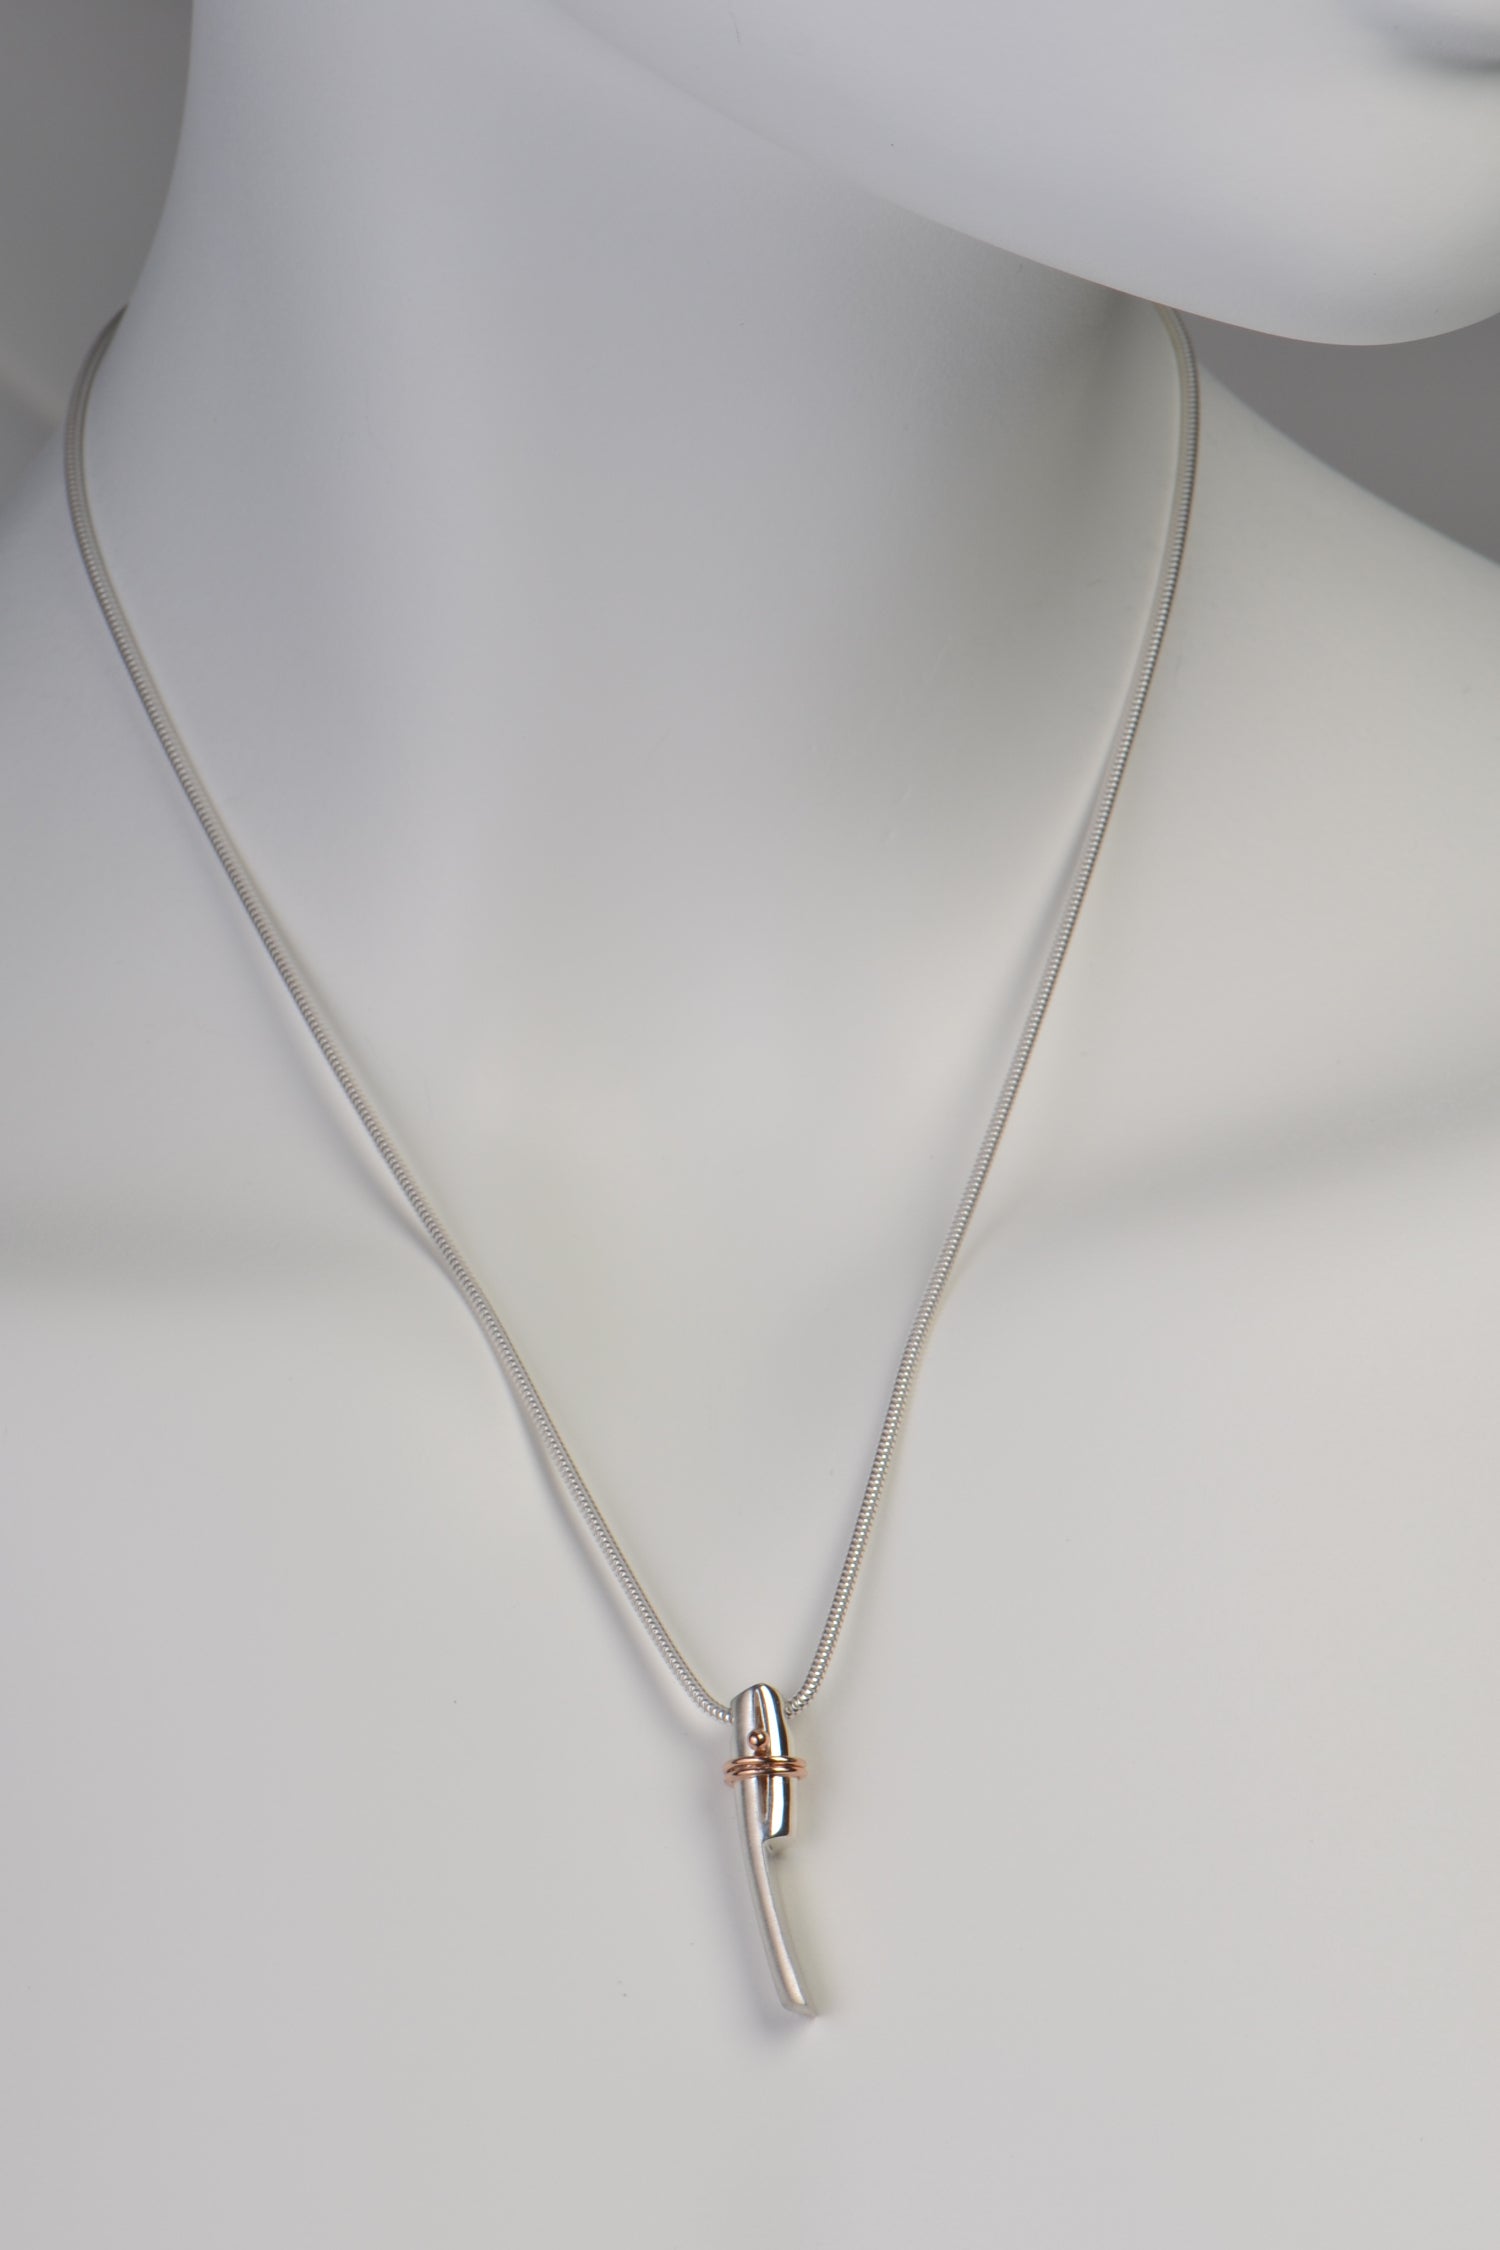 Christine Sadler Stay Together silver and rose gold necklace on 45cm long chain